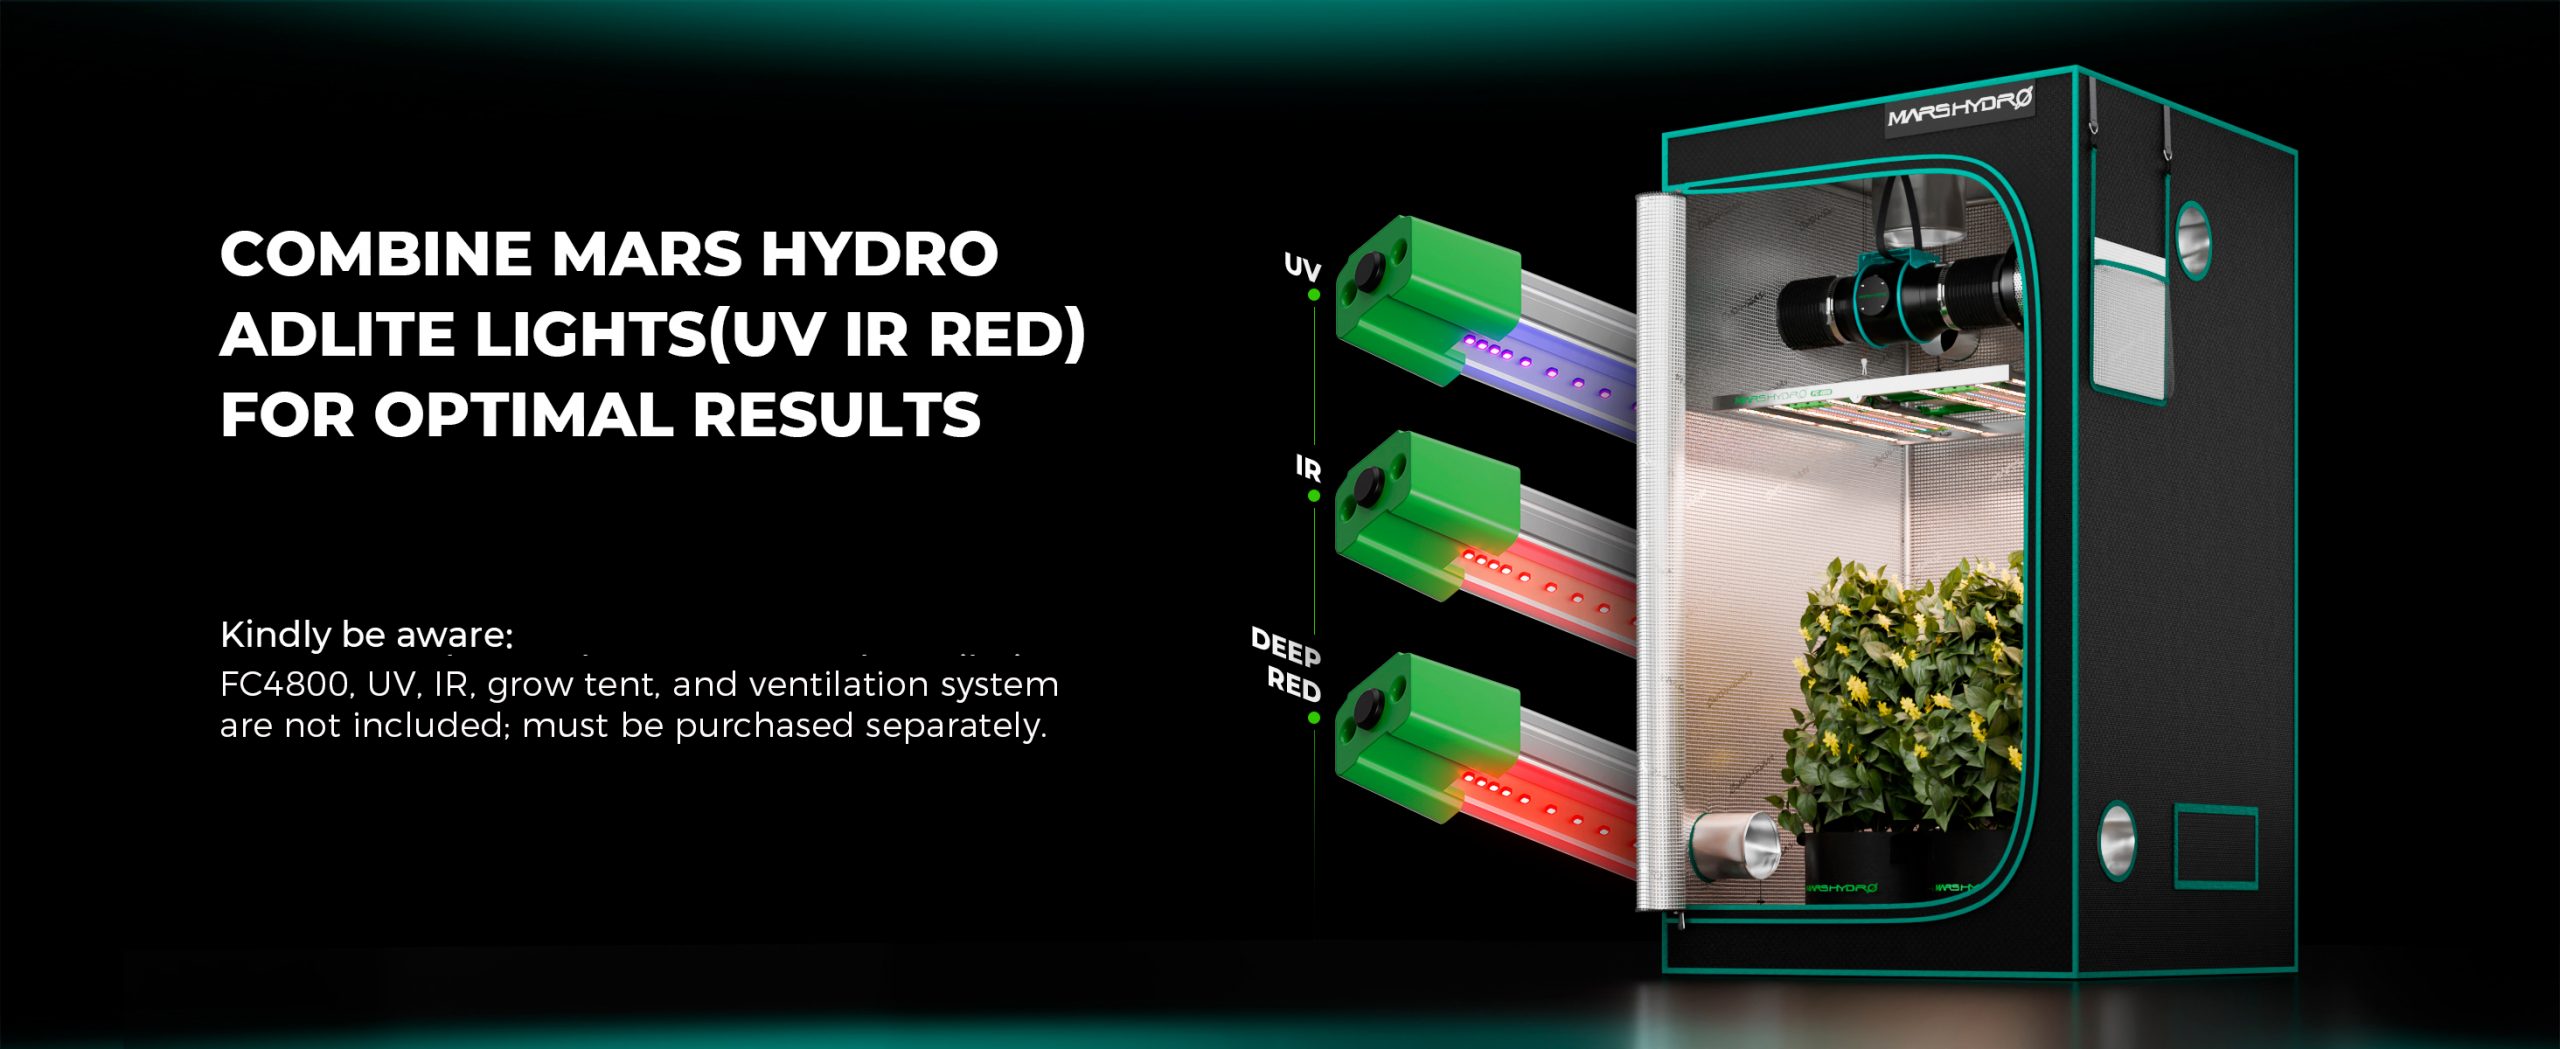 For-RED30-Combine-Mars-Hydro-Adlite-lights-uv-ir-deep-red-for-optimal-results